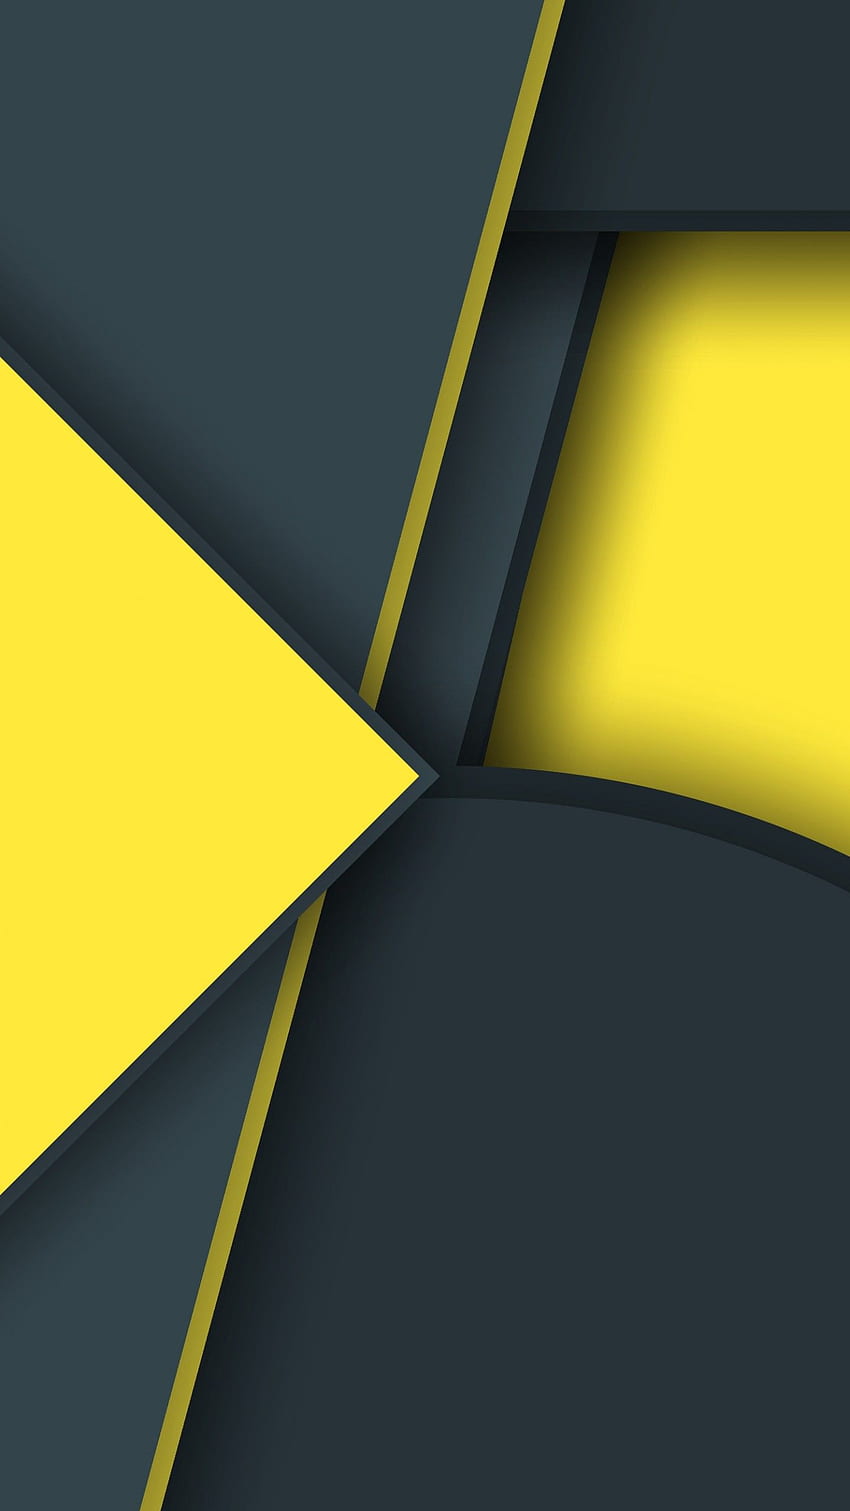 Tải xuống APK Aesthetic Yellow Wallpaper 4K cho Android